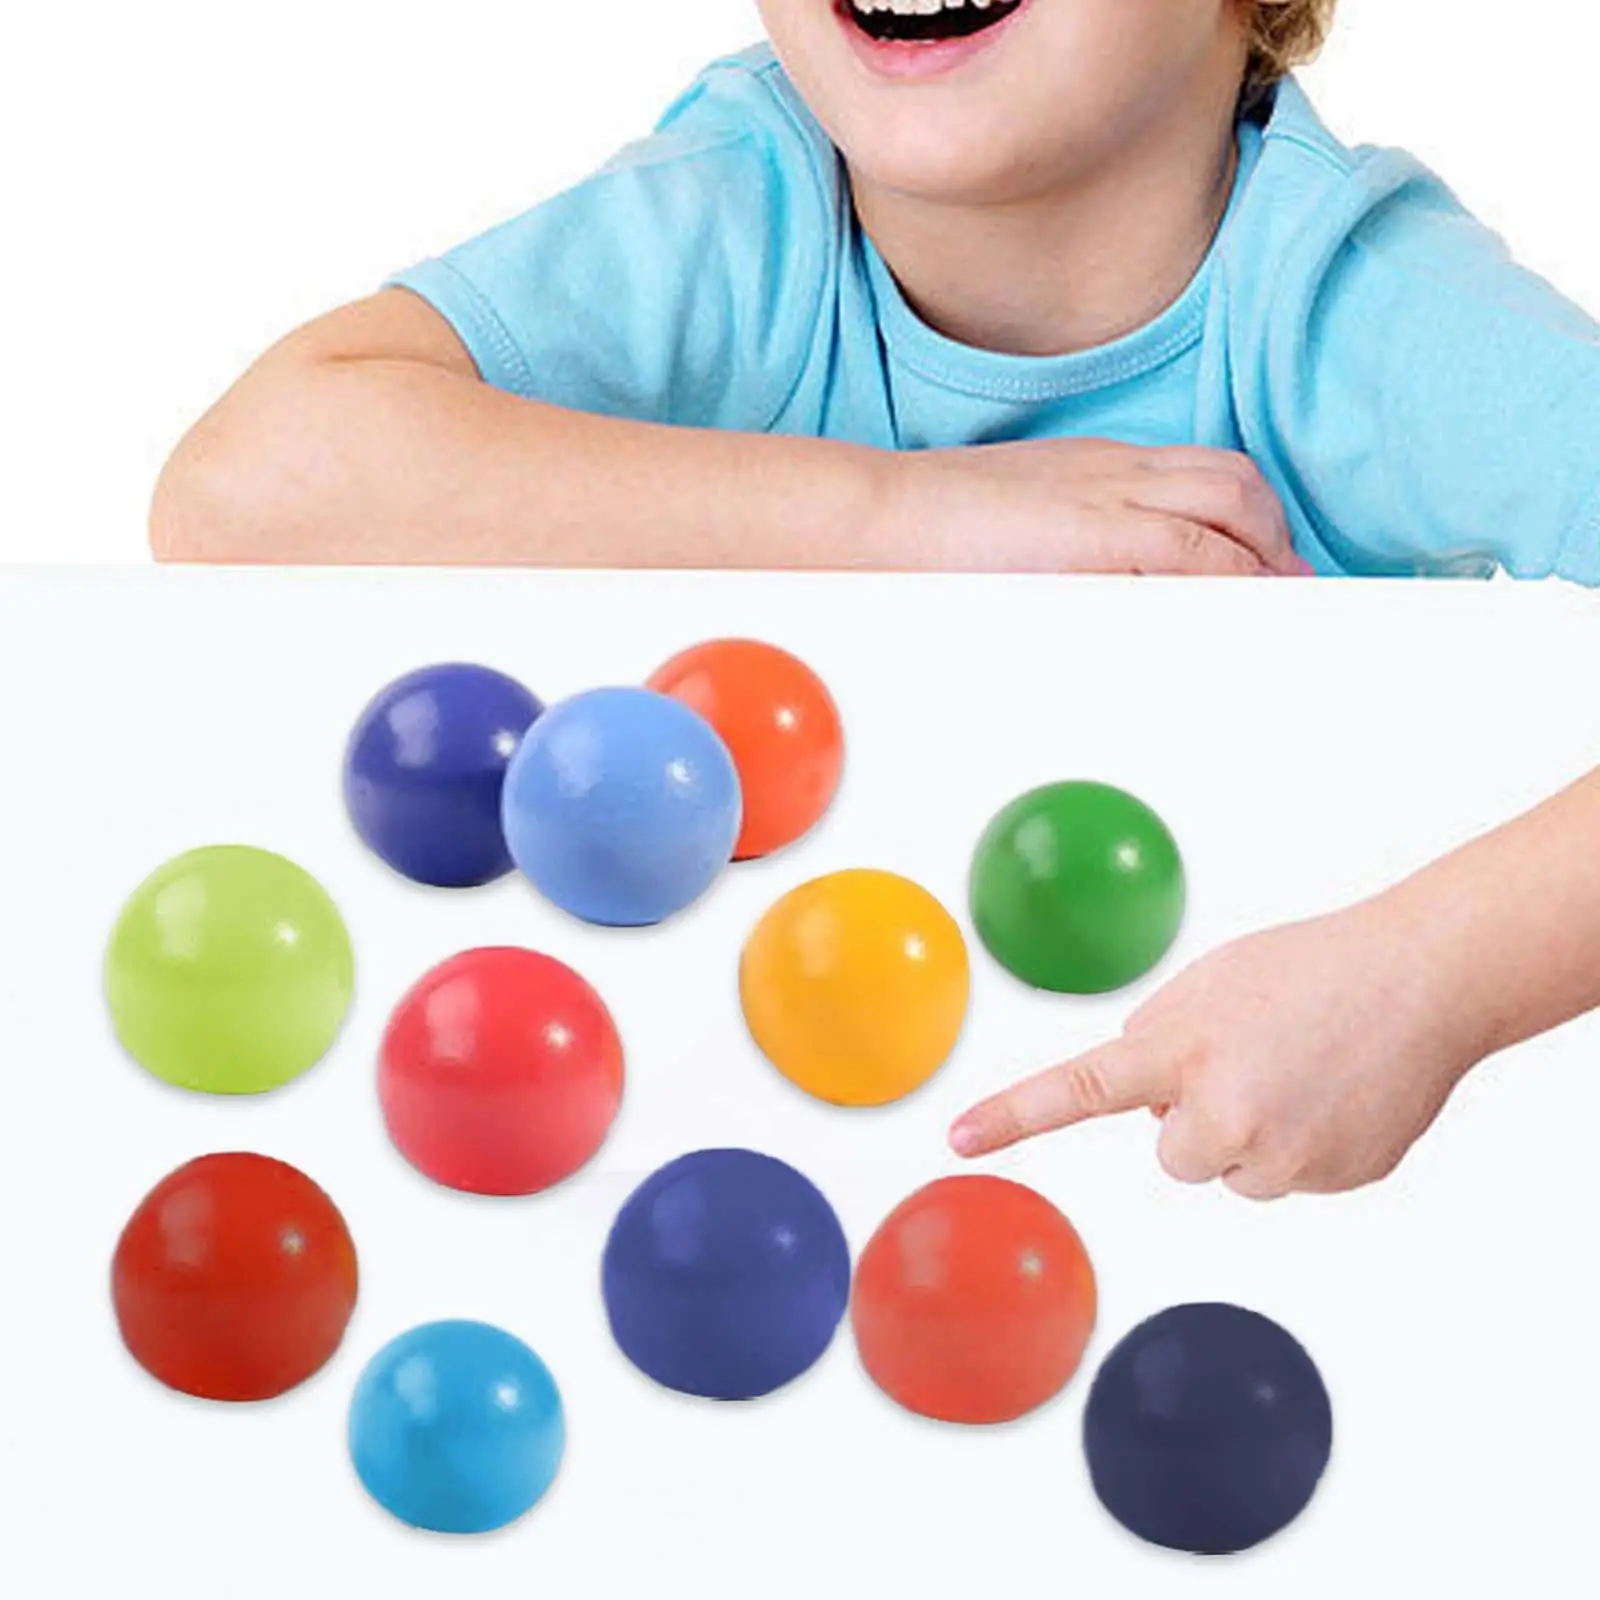 12 Pieces Montessori Multicolored Ball Set Early Educational Toys Ball Educational Counting Toy for Children Girls Kids